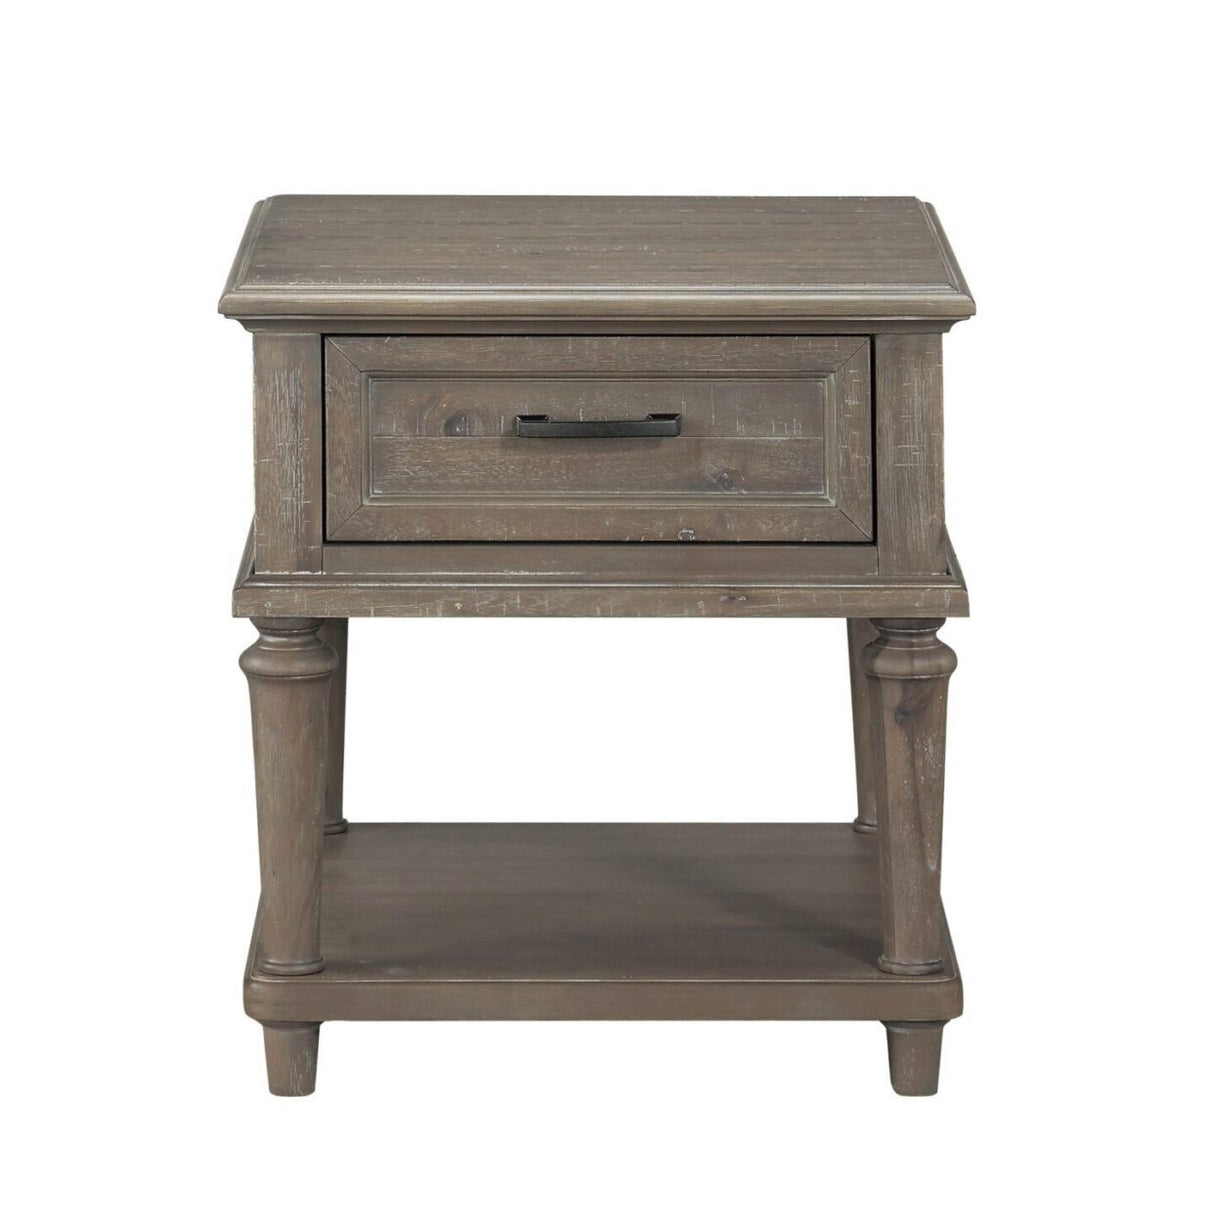 Cardano Driftwood Light Brown Wood End Table